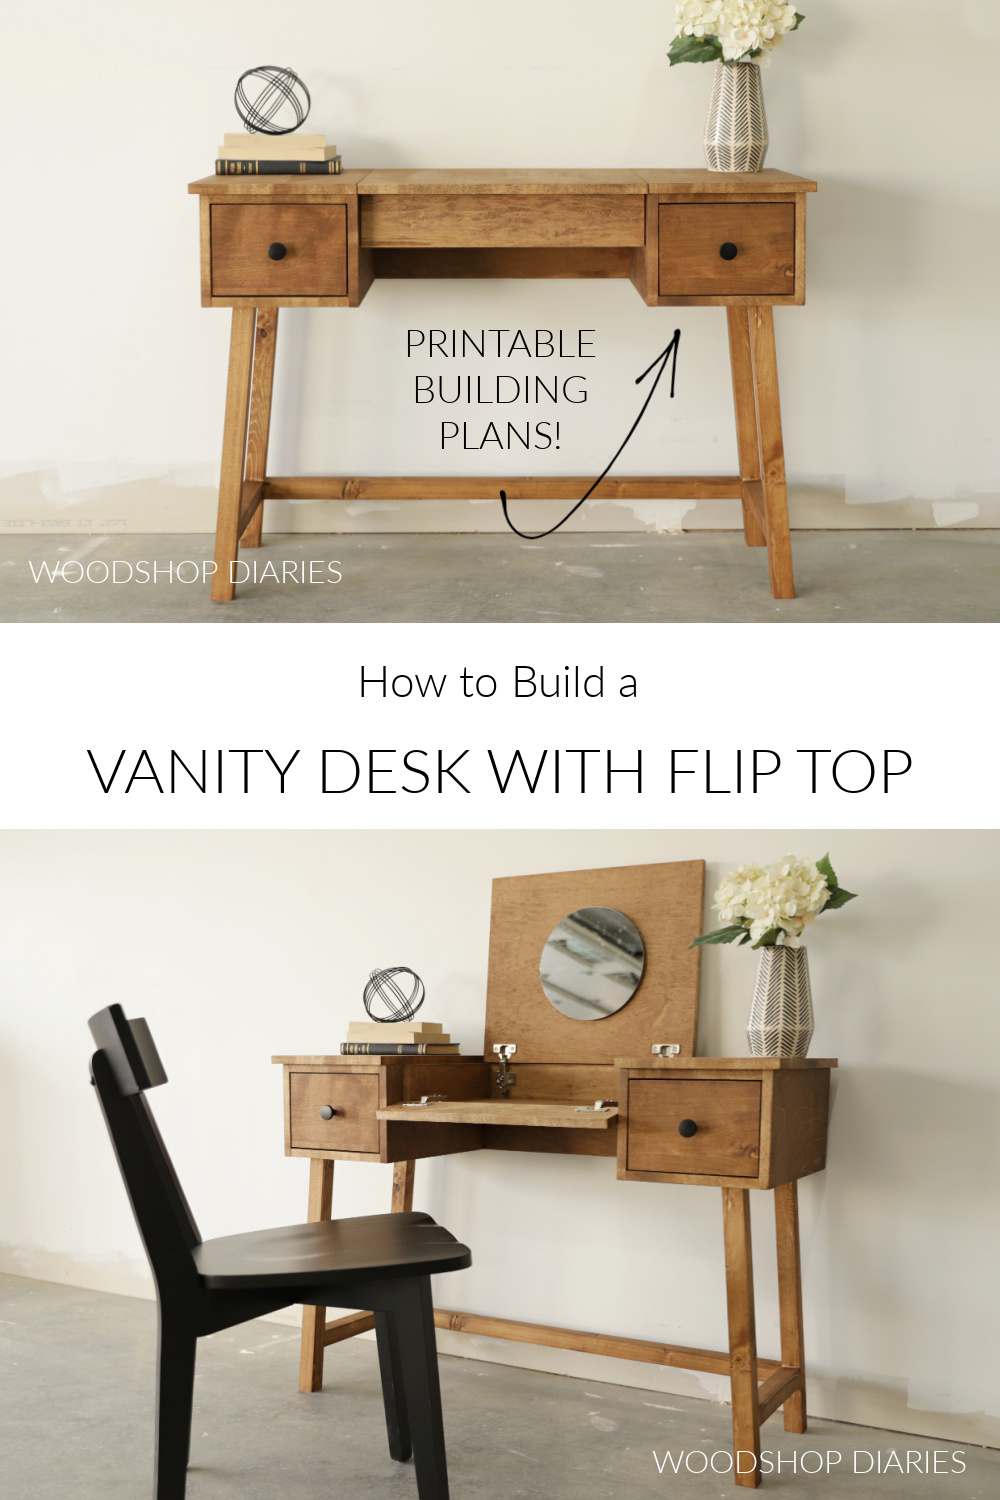 Pinterest collage showing closed makeup vanity desk at top and open makeup vanity desk at bottom with text "how to build a vanity desk with flip top"